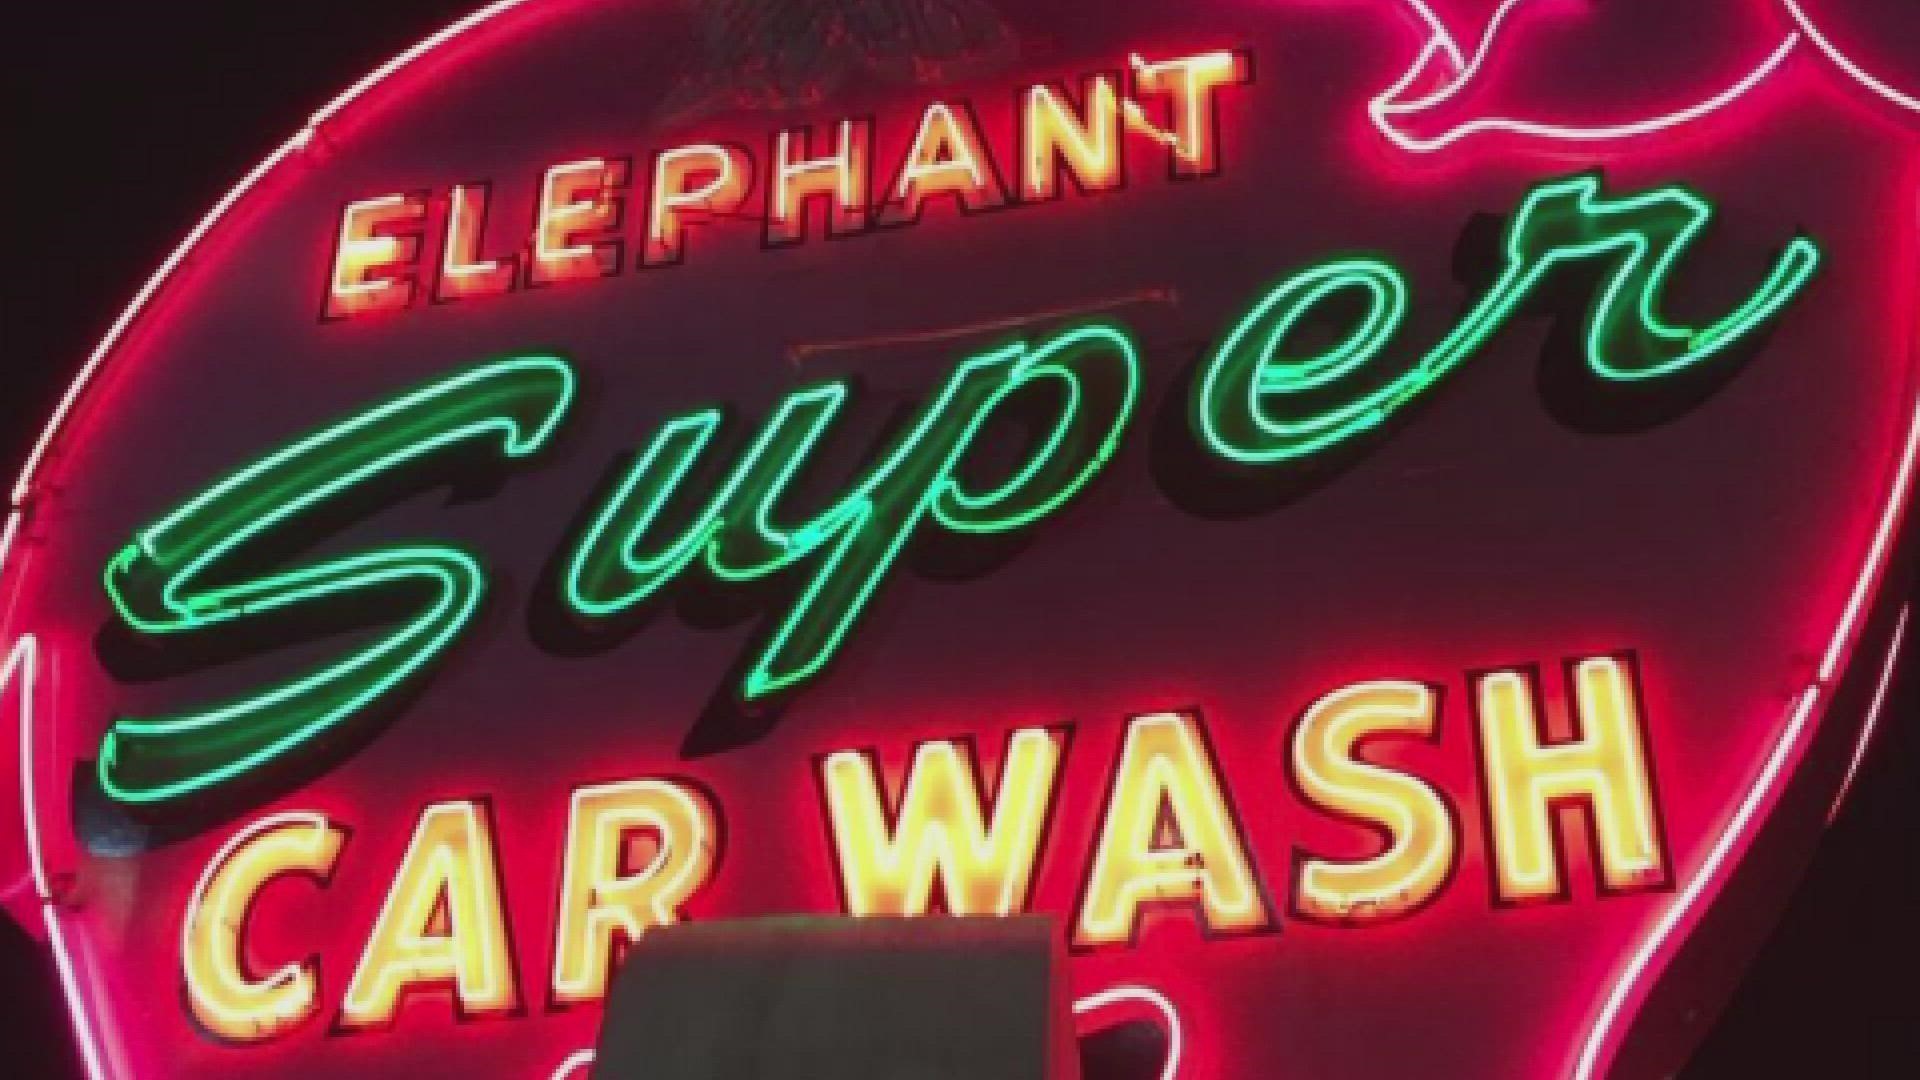 The iconic Pink Elephant Car Wash sign that was at the corner of Sixth Avenue and Battery Street for 56 years could soon show up on another Seattle street corner.